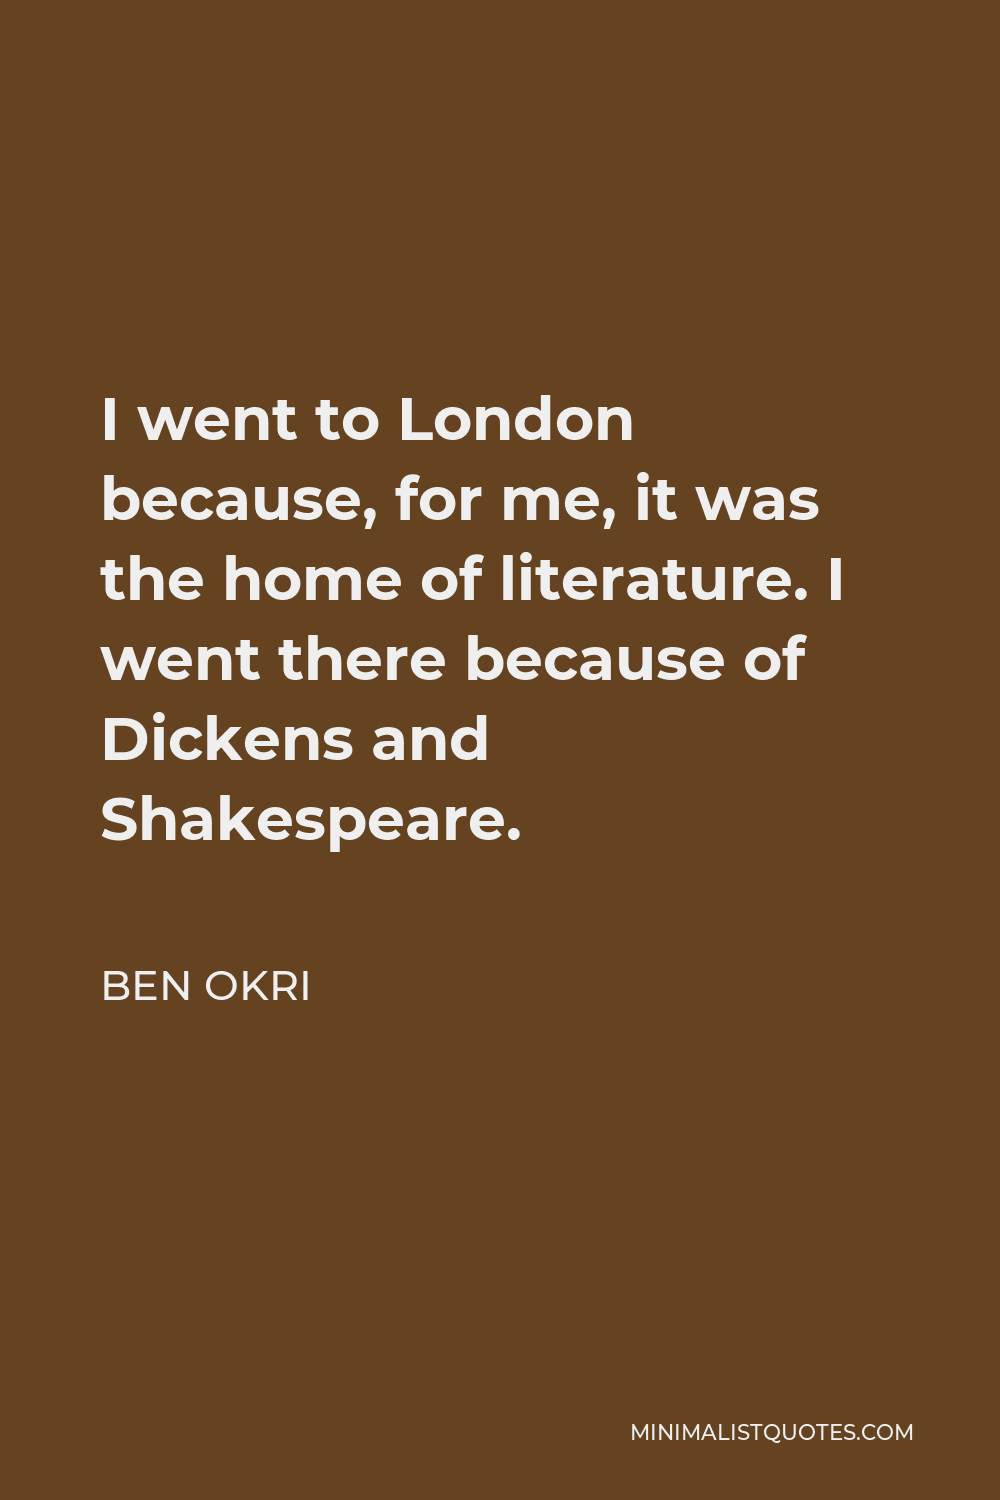 Ben Okri Quote - I went to London because, for me, it was the home of literature. I went there because of Dickens and Shakespeare.